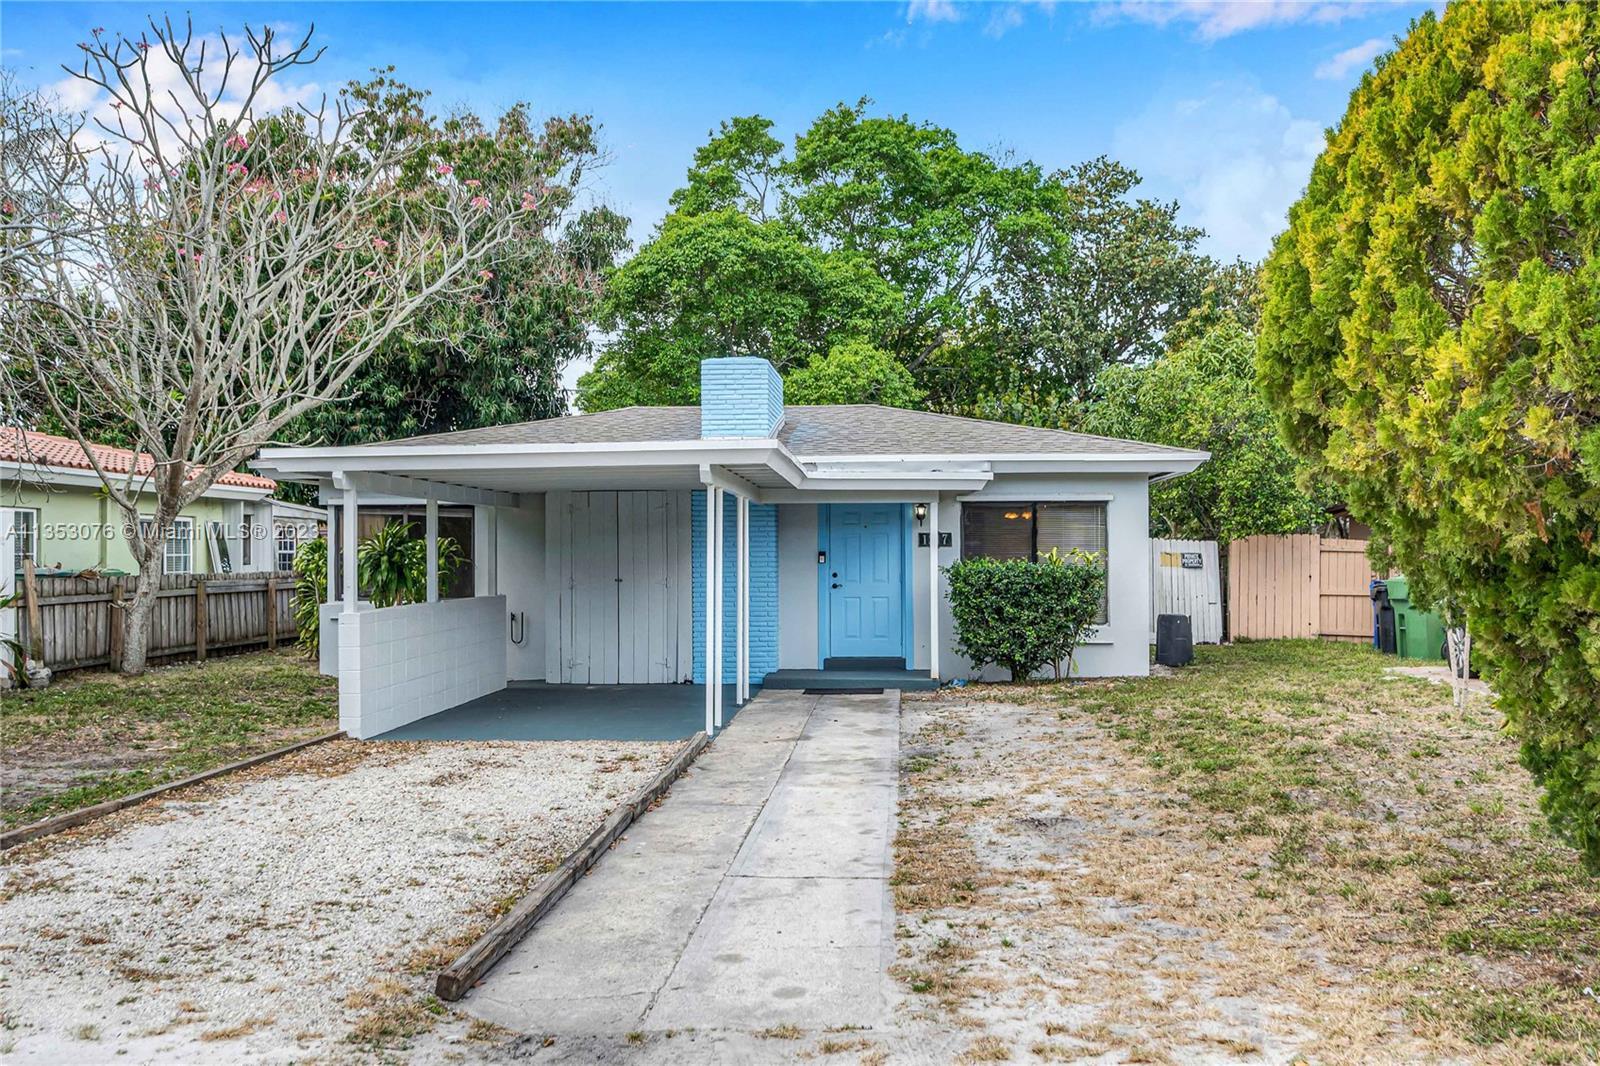 The ideal canvas to make this your quaint home! Located 4min drive to Wilton Manors and 10min drive 